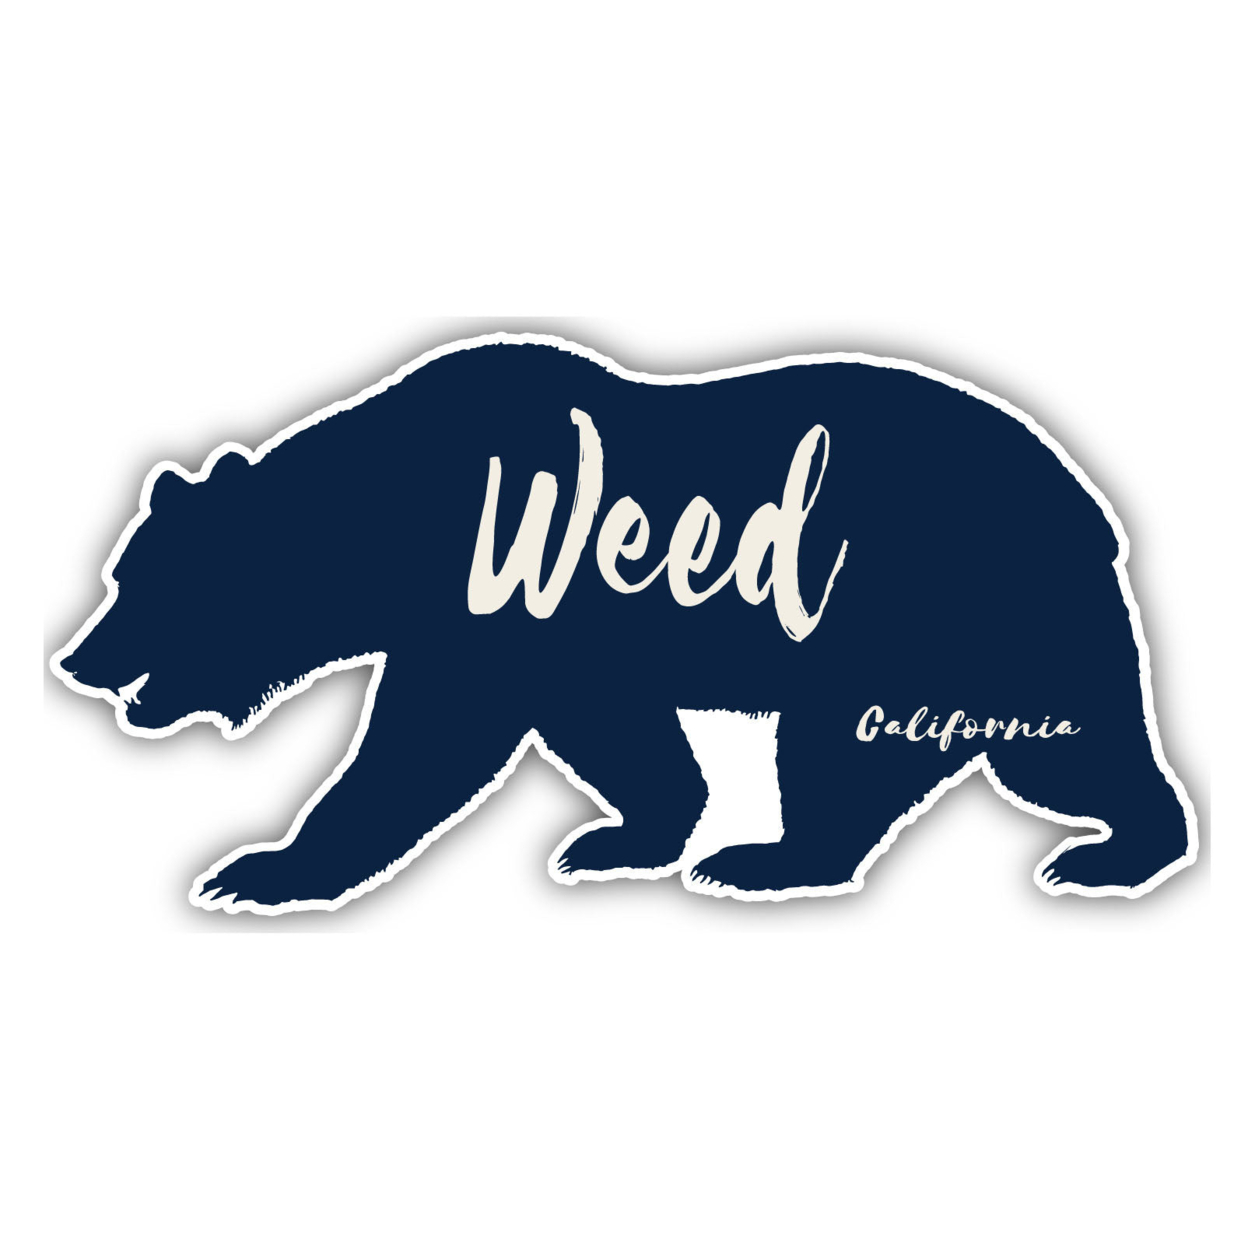 Weed California Souvenir Decorative Stickers (Choose Theme And Size) - Single Unit, 2-Inch, Bear